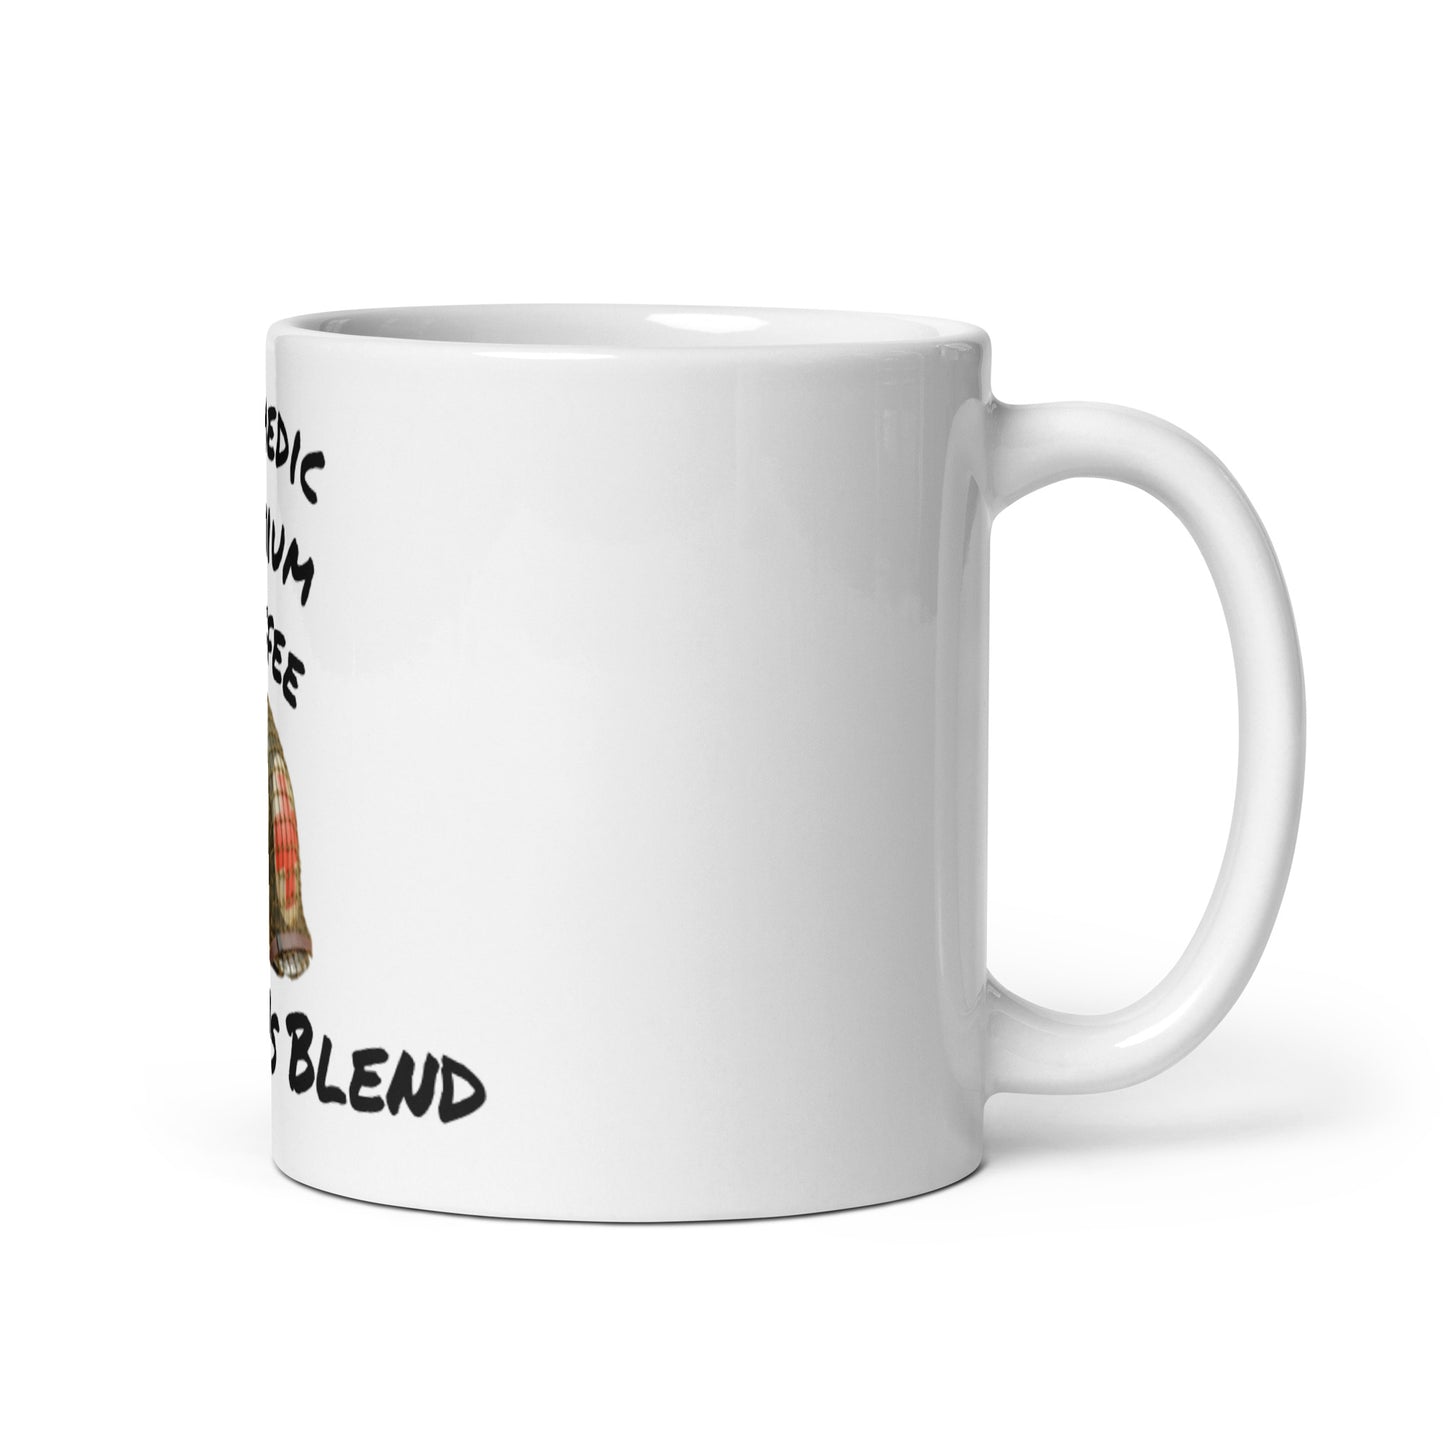 Andrew's Blend Coffee Cup